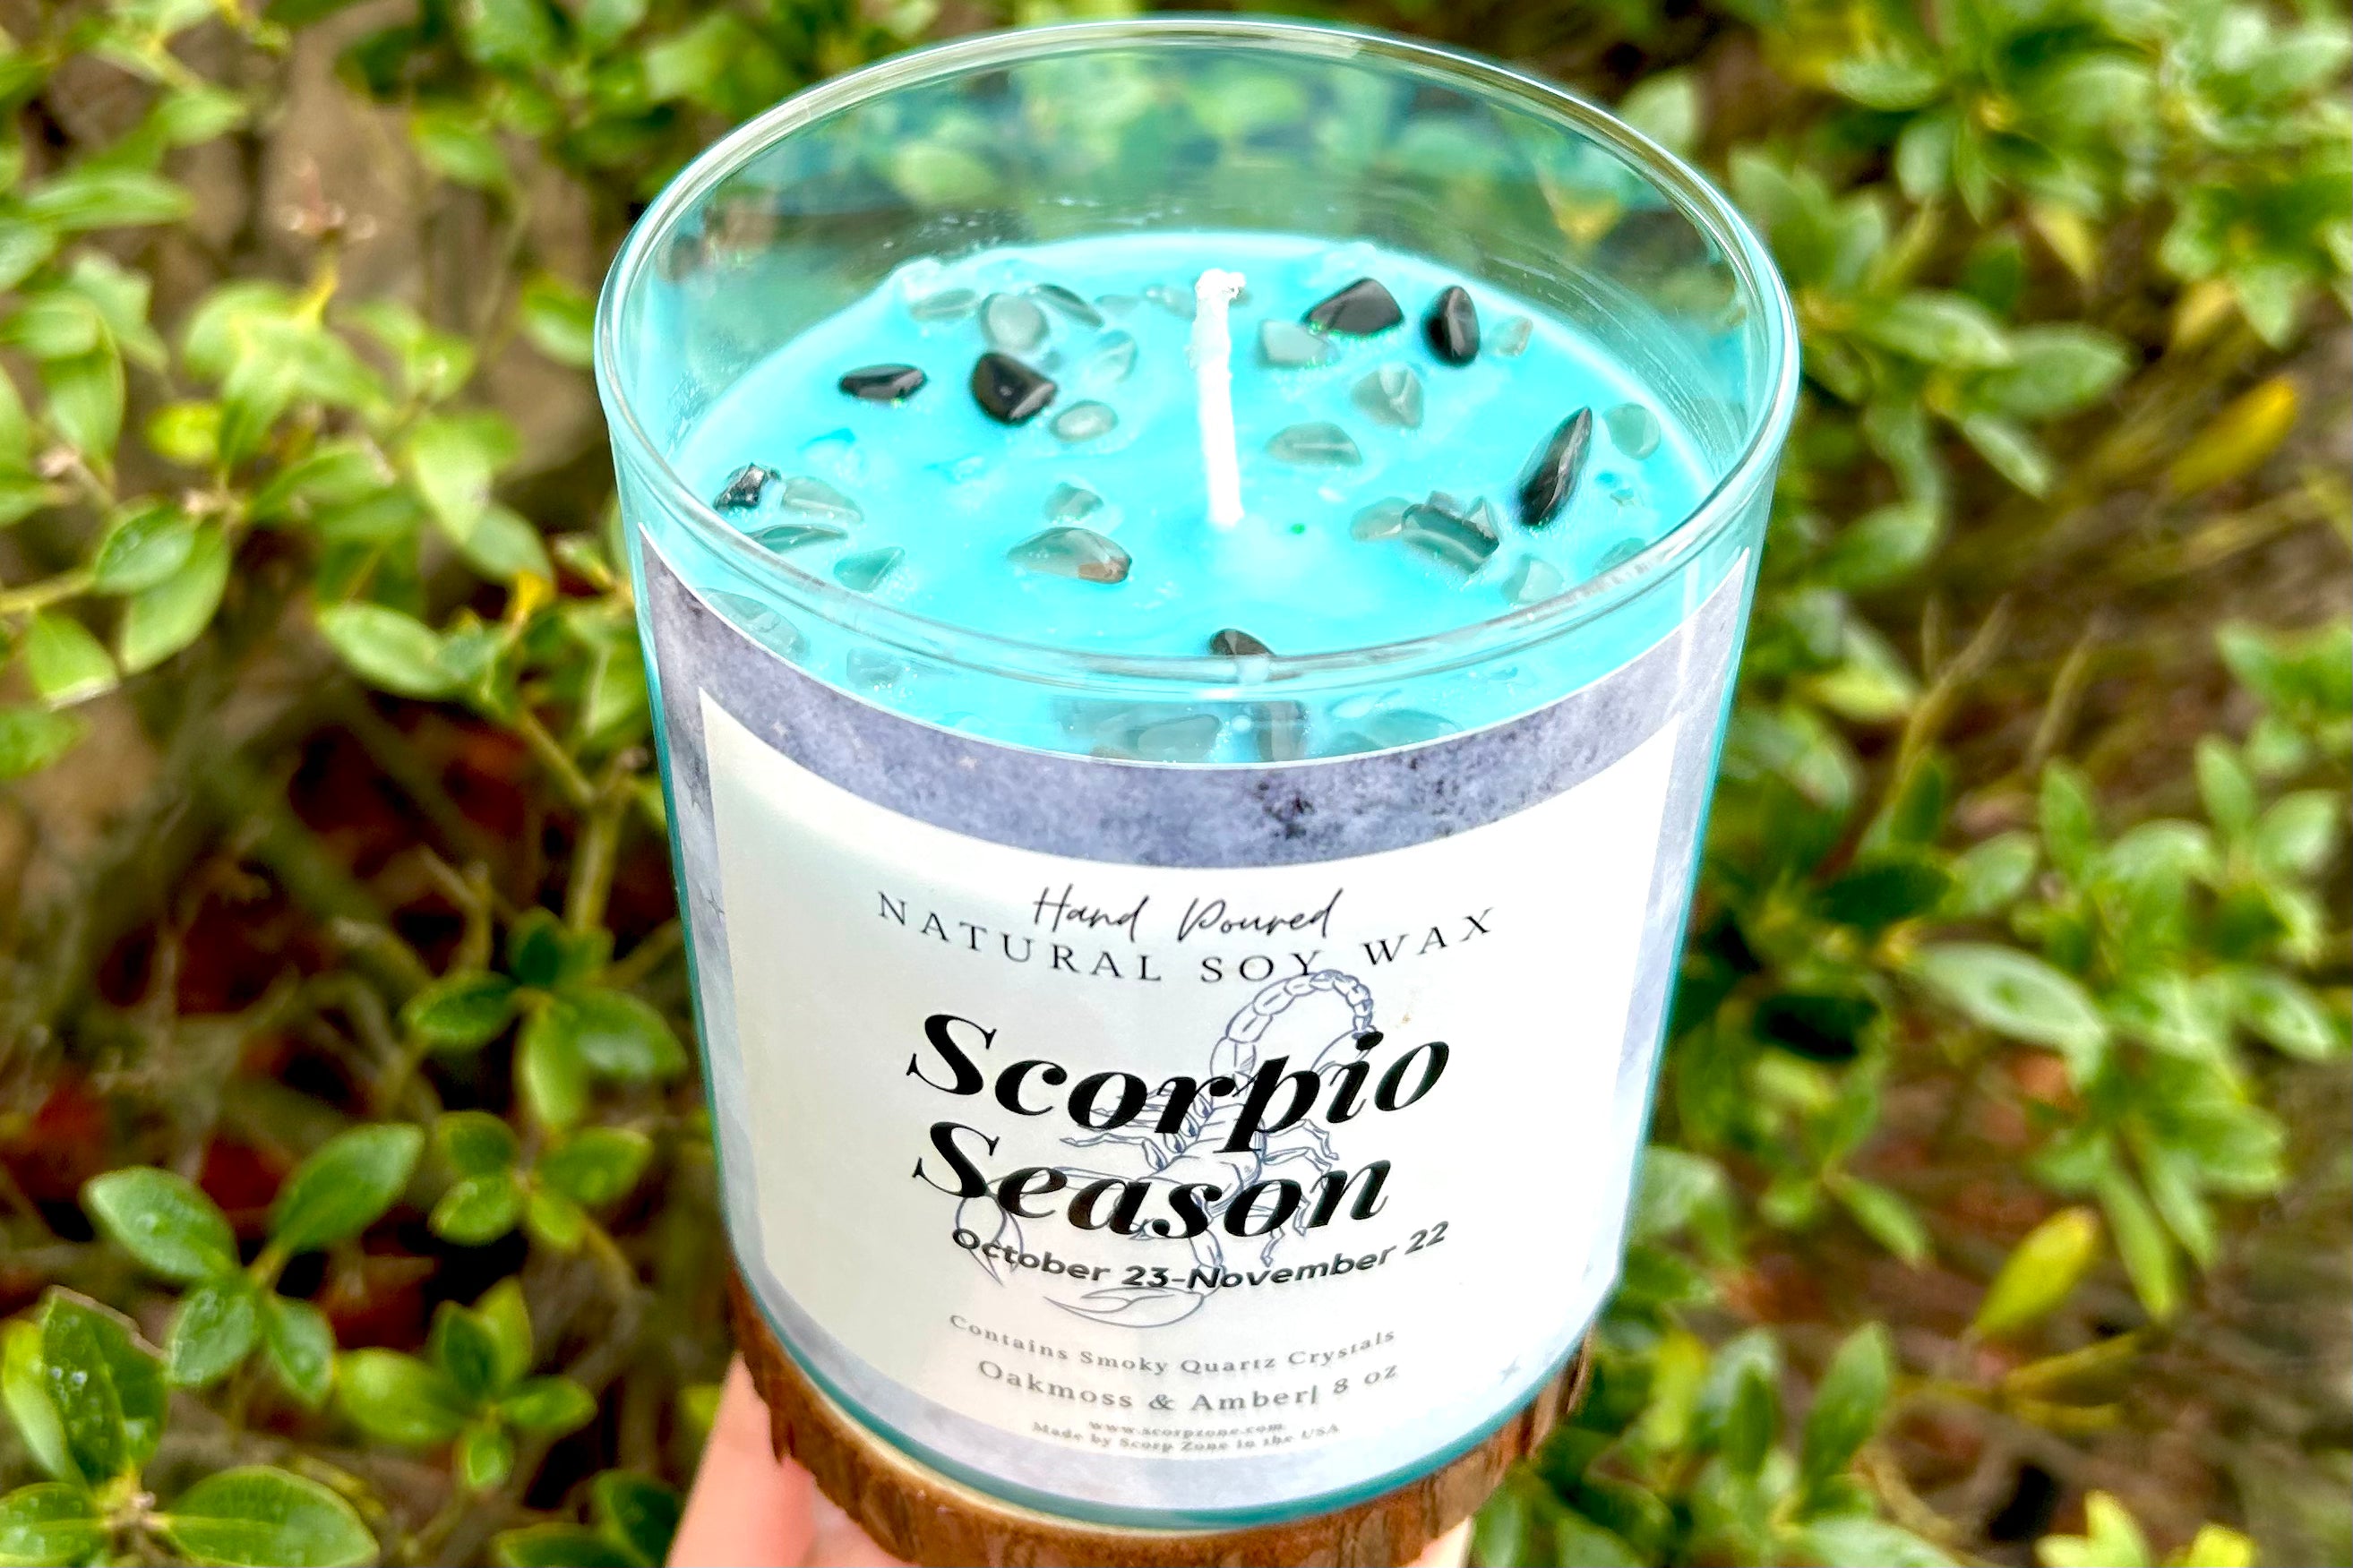 Scorpio Season Crystal Soy Wax Candle by Scorp Zone